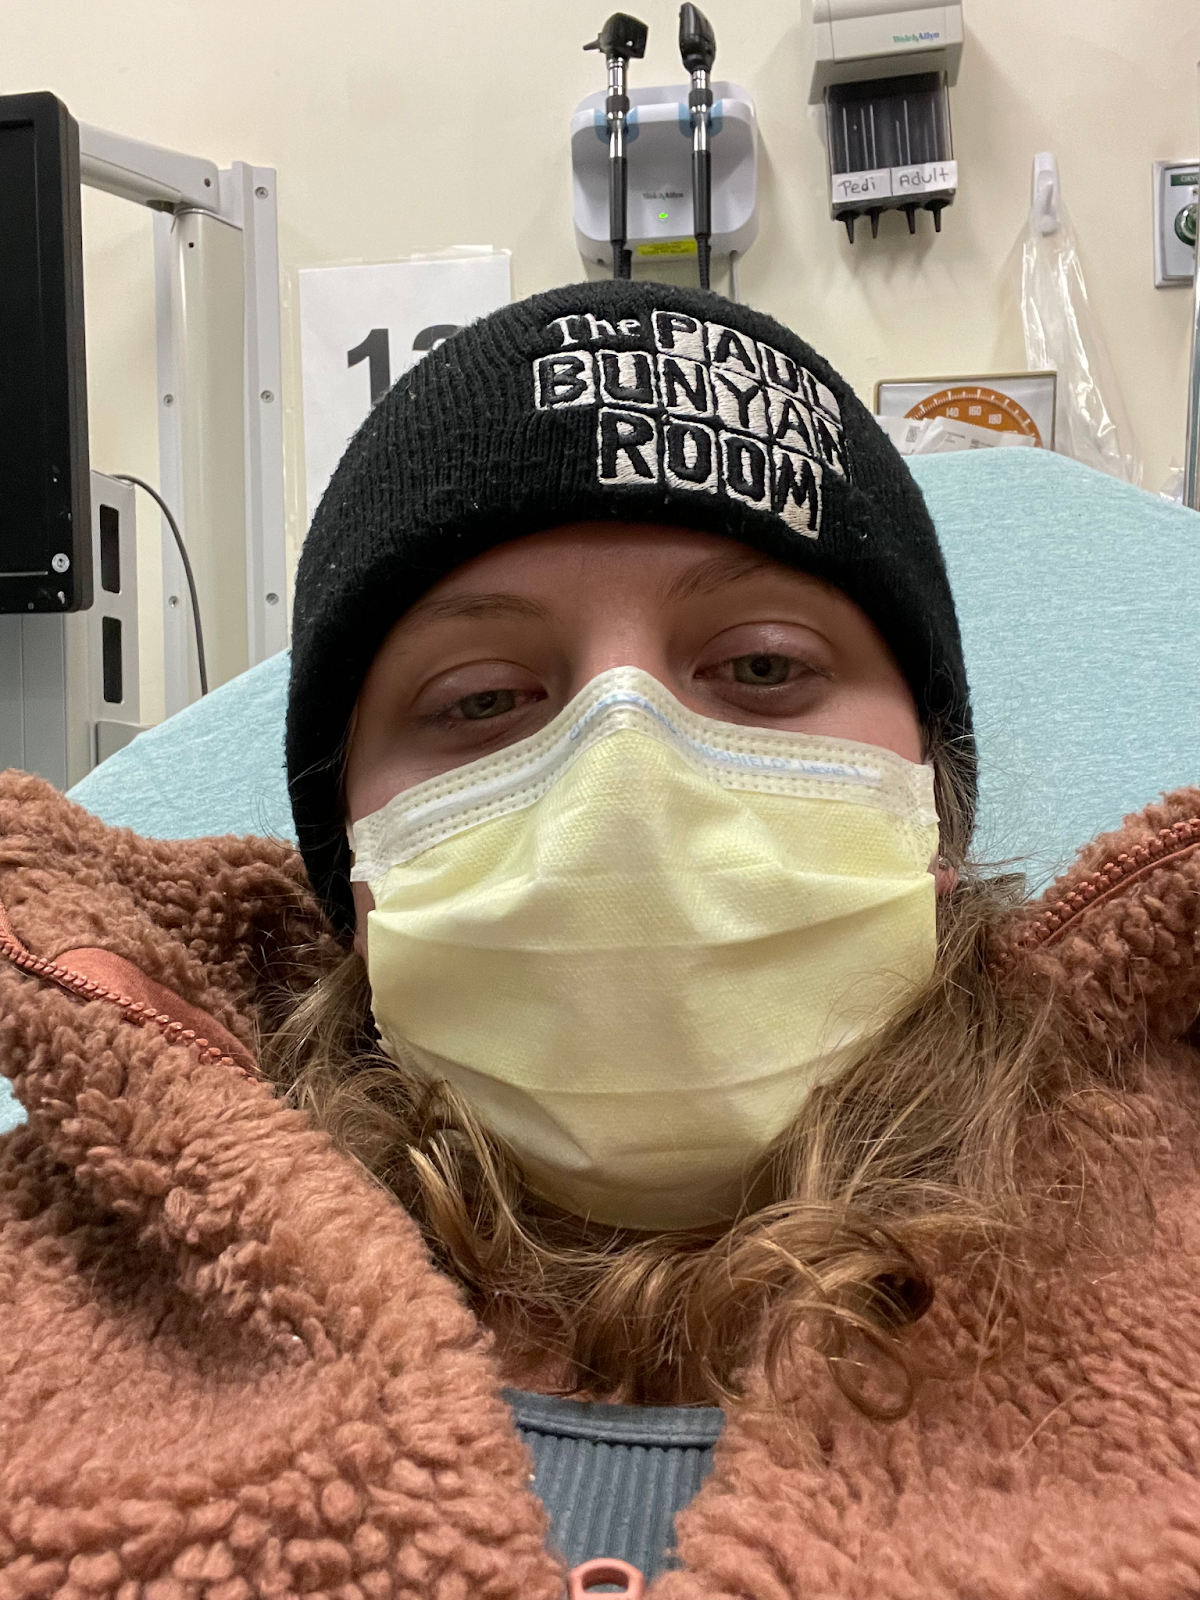 Laura pic/selfie while waiting in the ER after the injury.